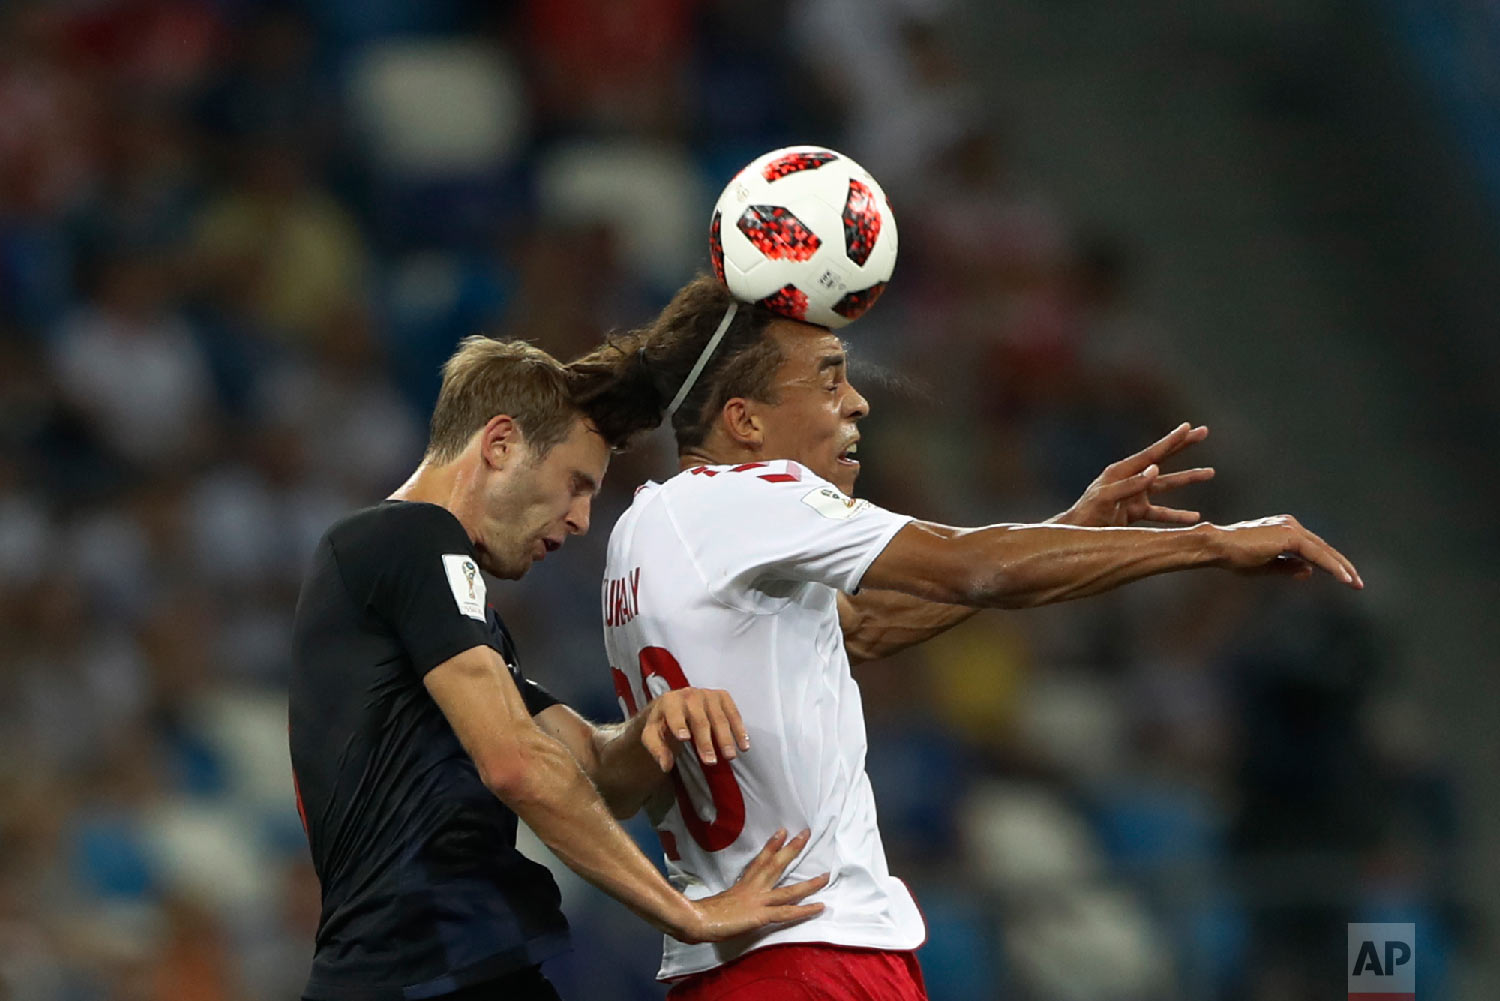  Denmark's Yussuf Yurary Poulsen, right, goes for a header with Croatia's Ivan Strinic during the round of 16 match between Croatia and Denmark at the 2018 soccer World Cup in the Nizhny Novgorod Stadium, in Nizhny Novgorod , Russia, Sunday, July 1, 